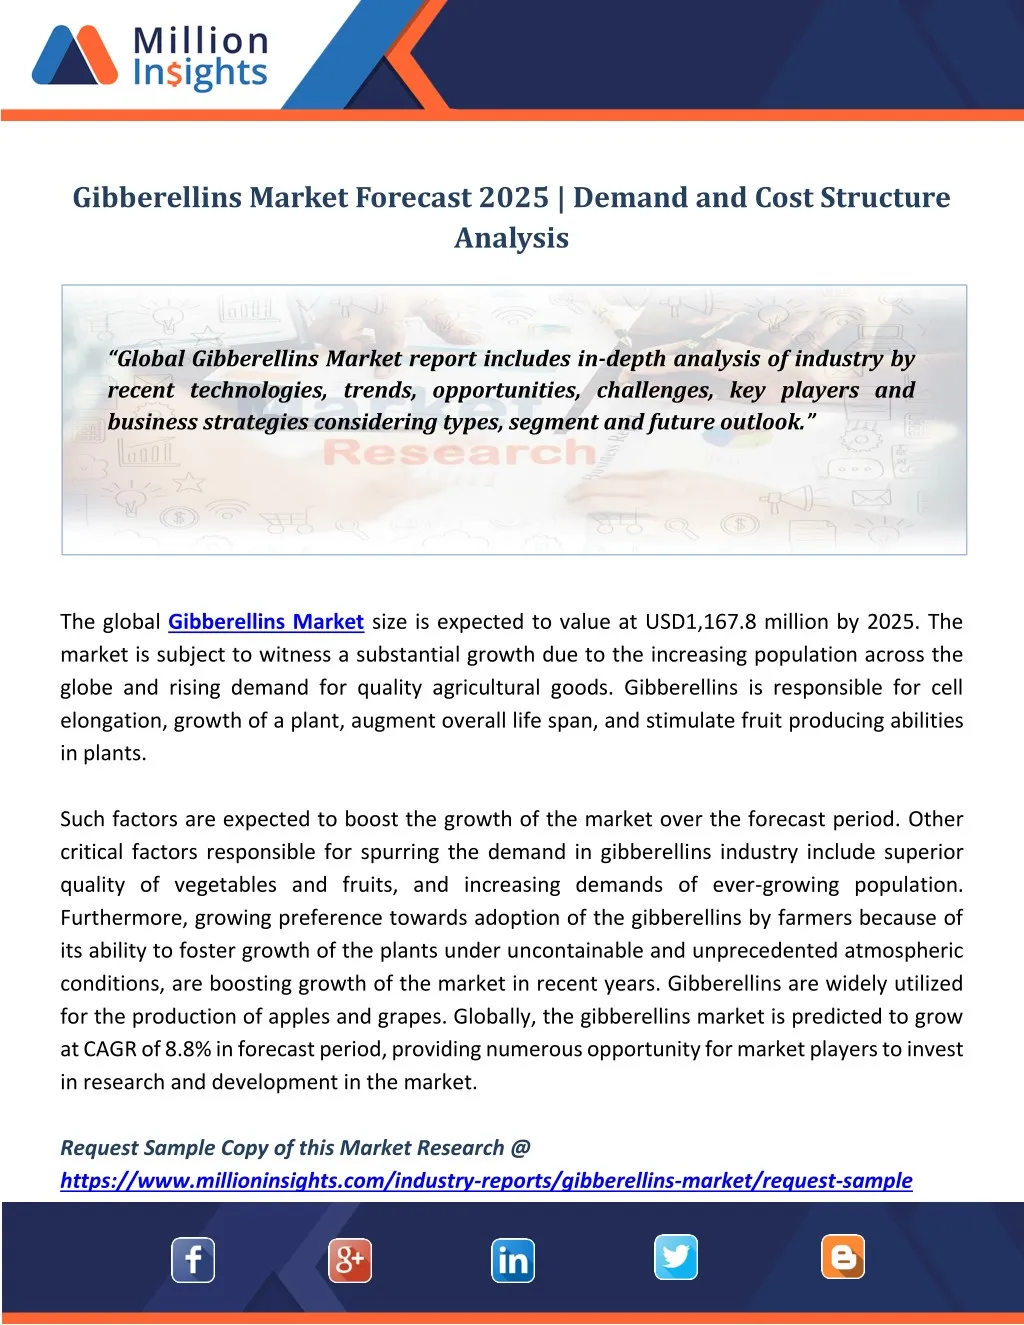 gibberellins market forecast 2025 demand and cost